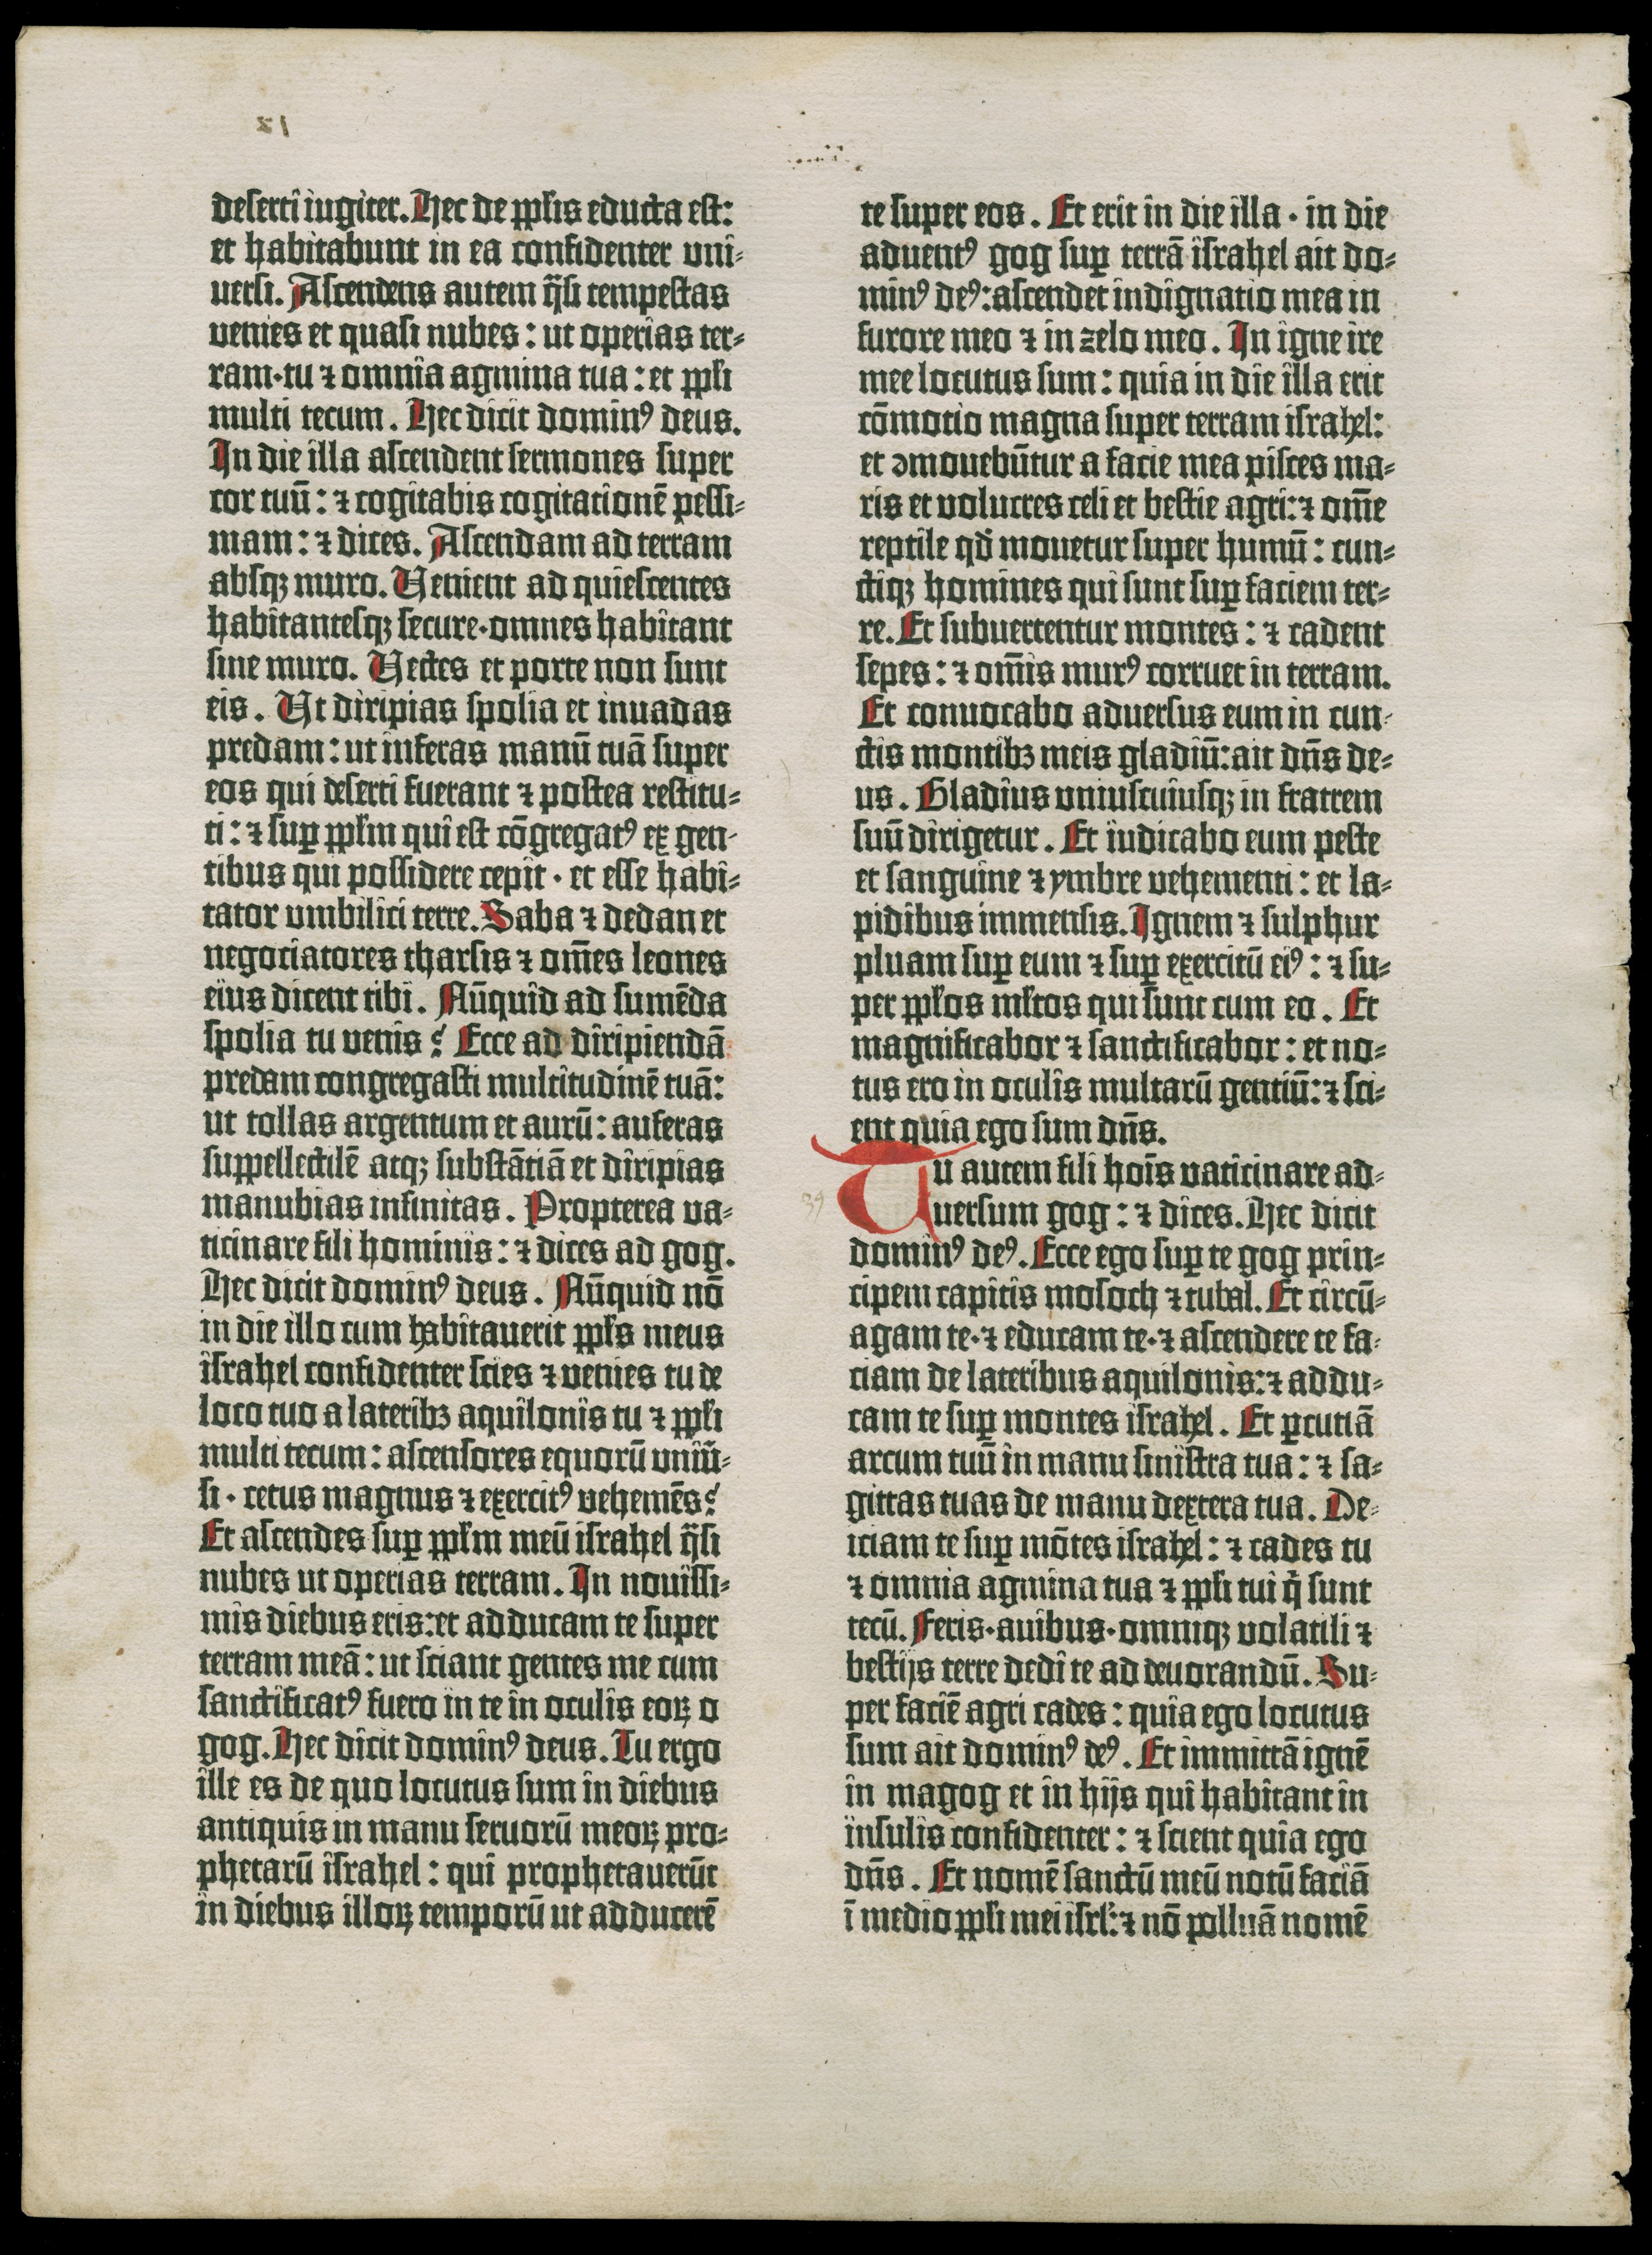 [A Leaf from the Gutenberg Bible (Ezekiel 37:11 to 39:7.).] First complete book printed with metal type on a book press, Mainz, Germany, around 1454.